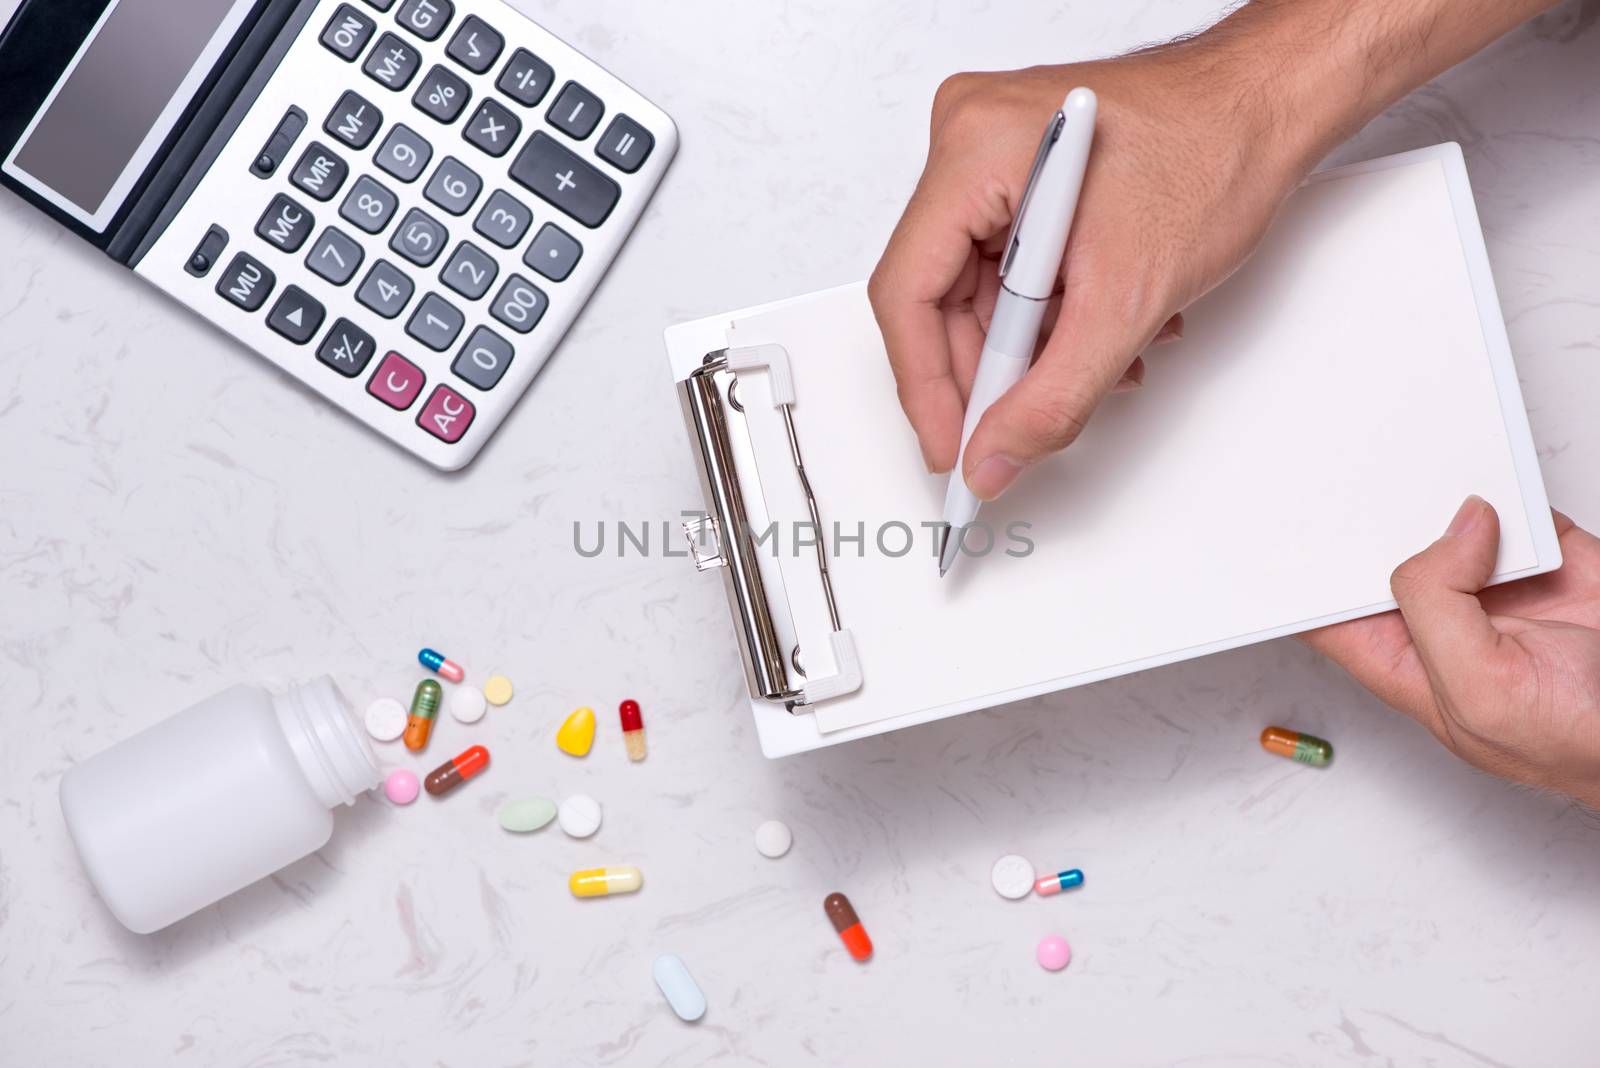 Healthcare costs concept. Opened medicine bottle and spilled out by makidotvn